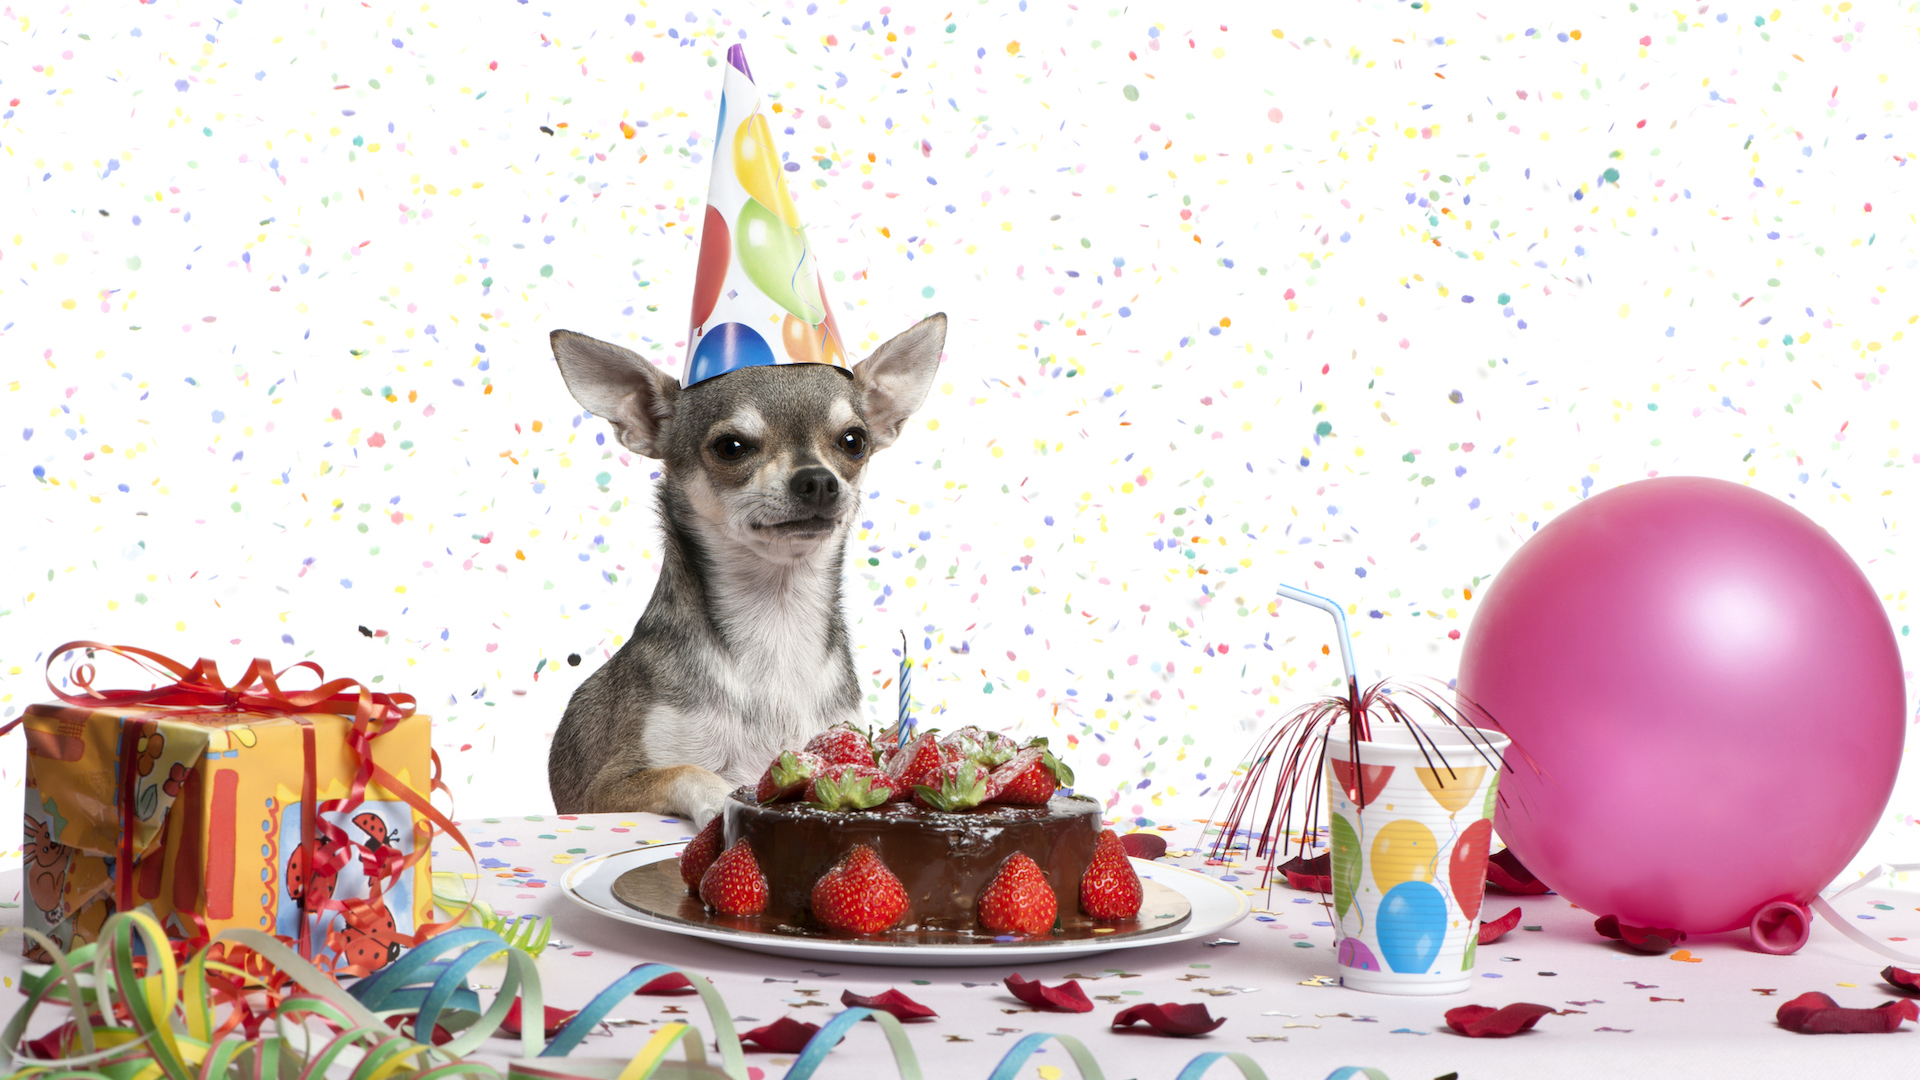 A Chihuahua celebrating a birthday in style 